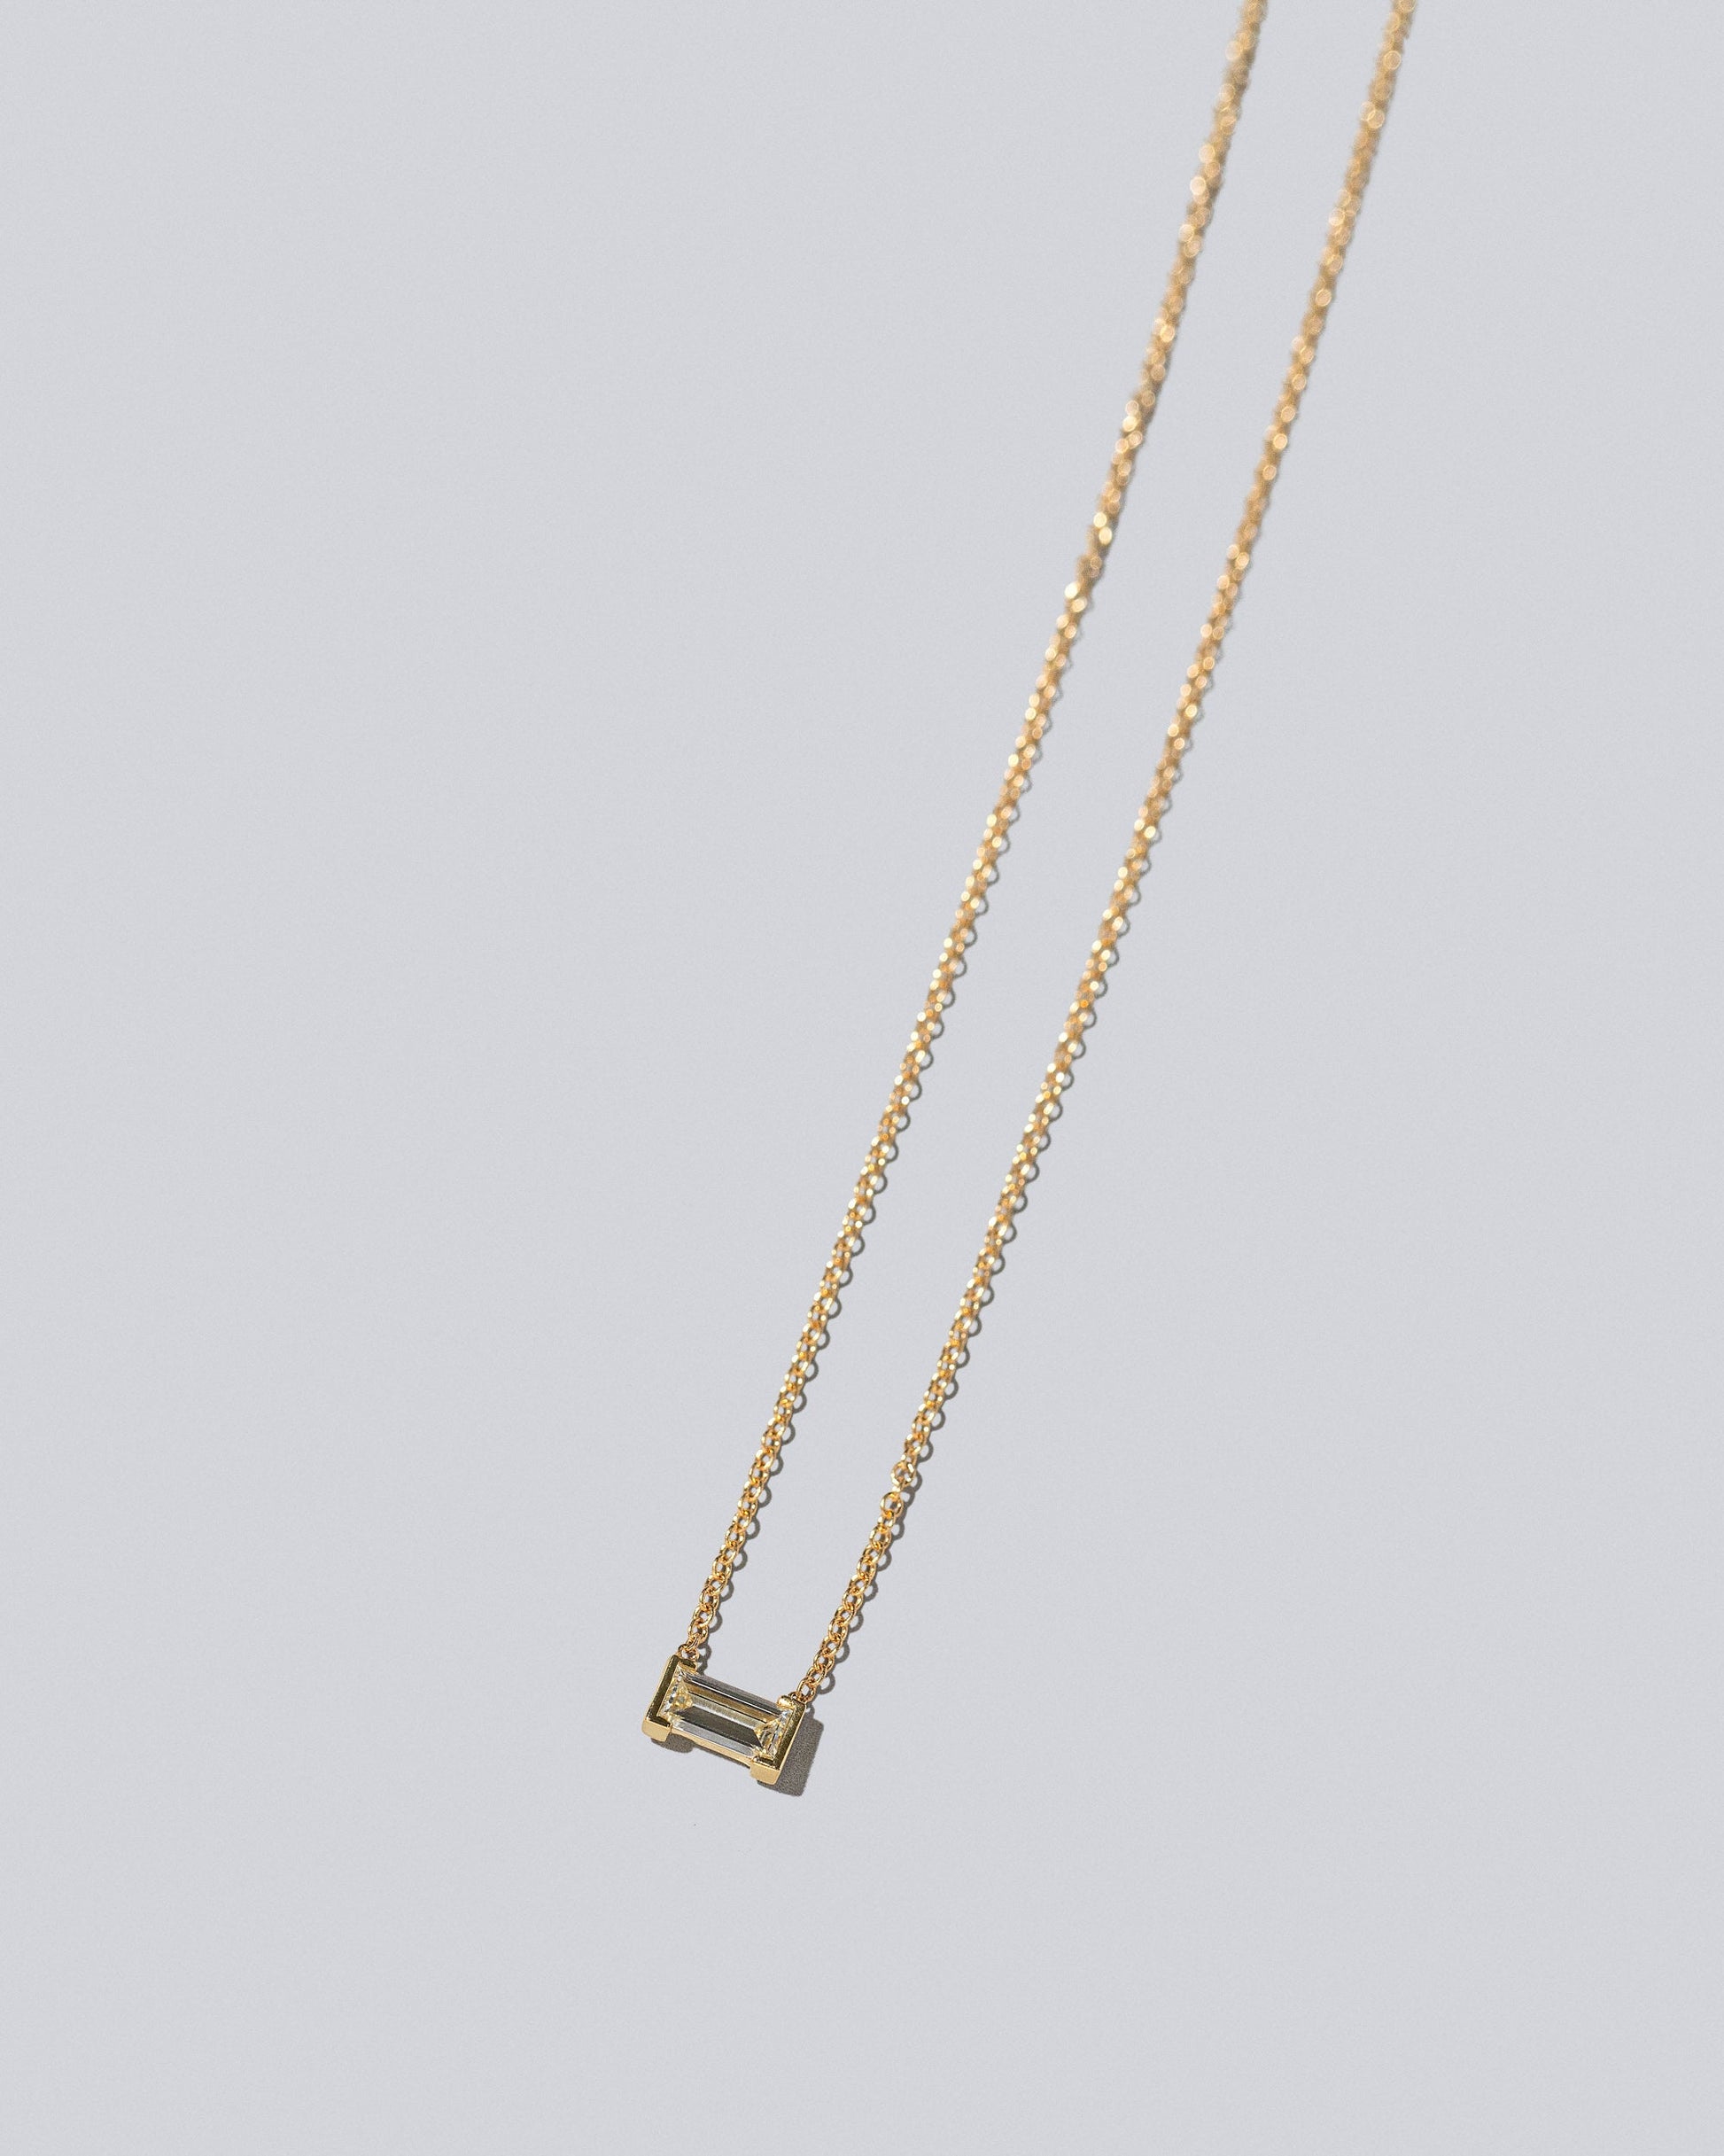 Product photo of Alto Necklace on light background